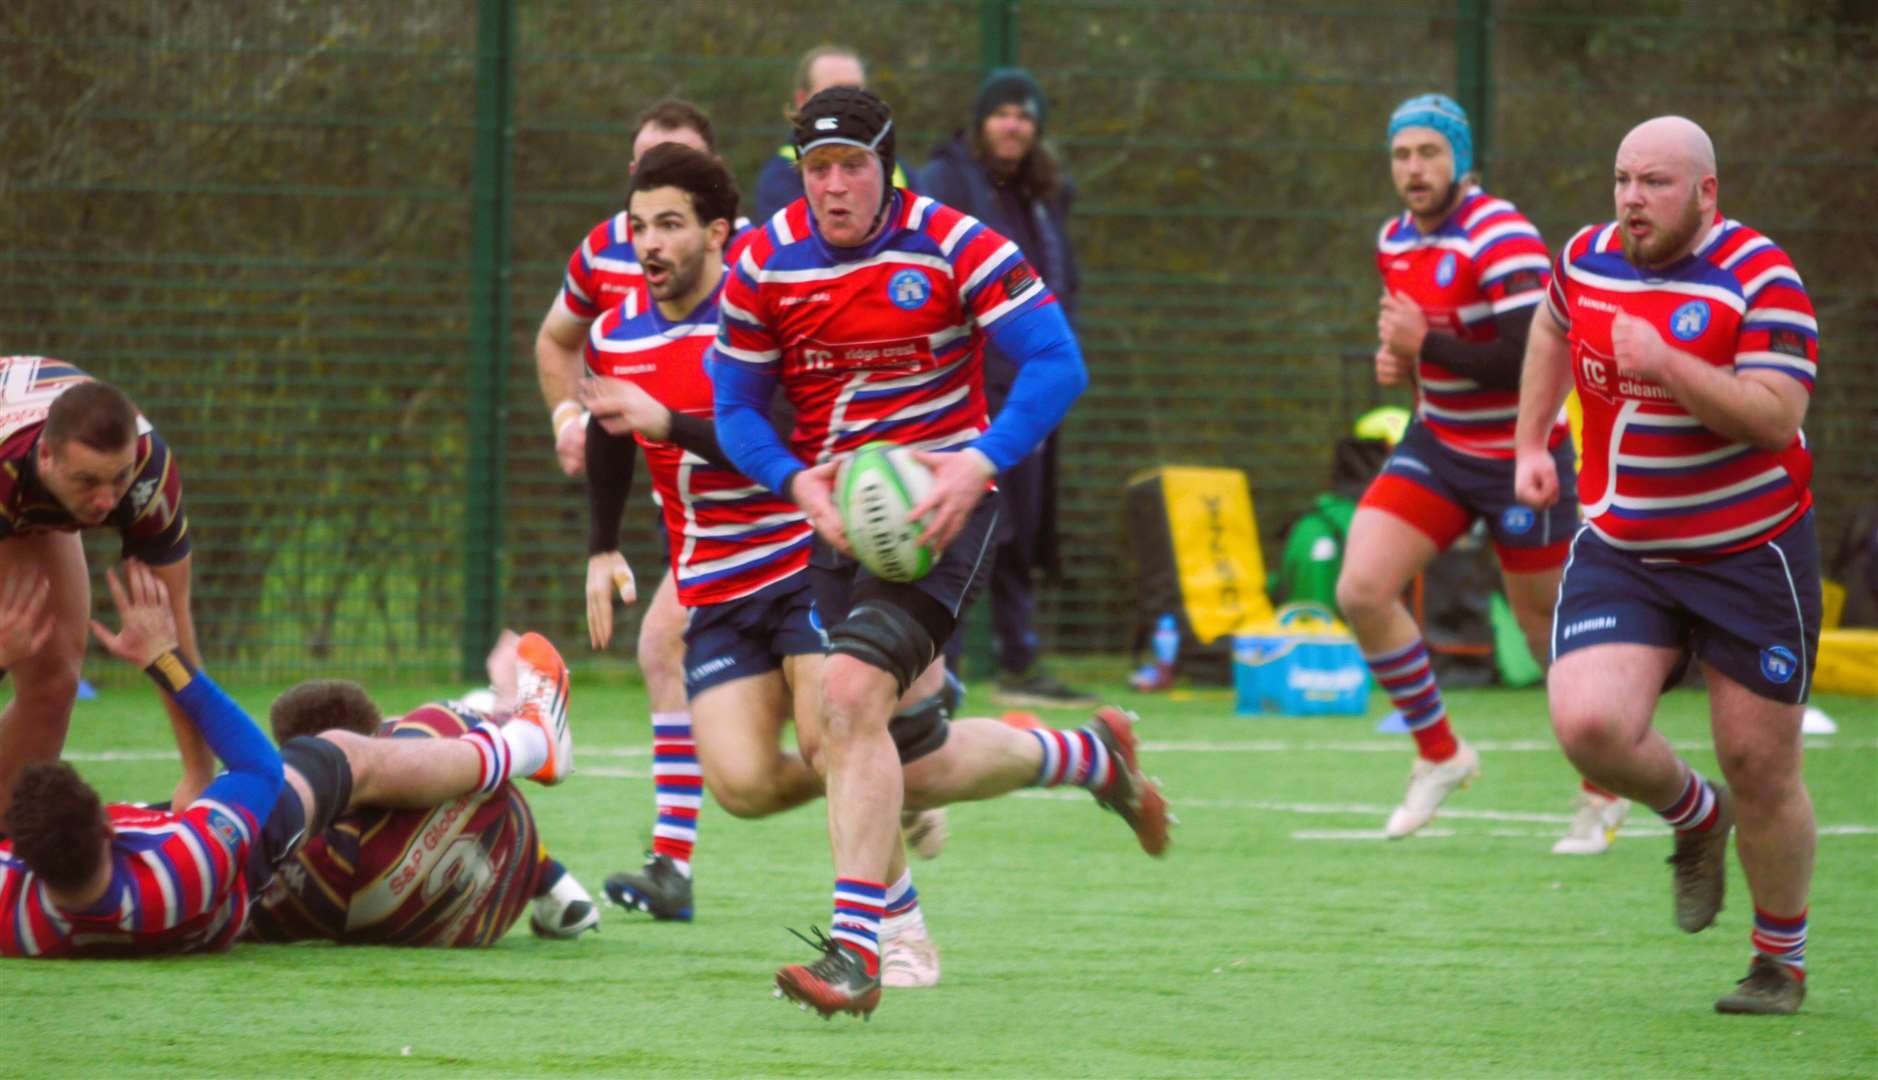 Try-scorer Truman Sullivan on the charge for Tonbridge Juddians on Saturday. Picture: Adam Hookway